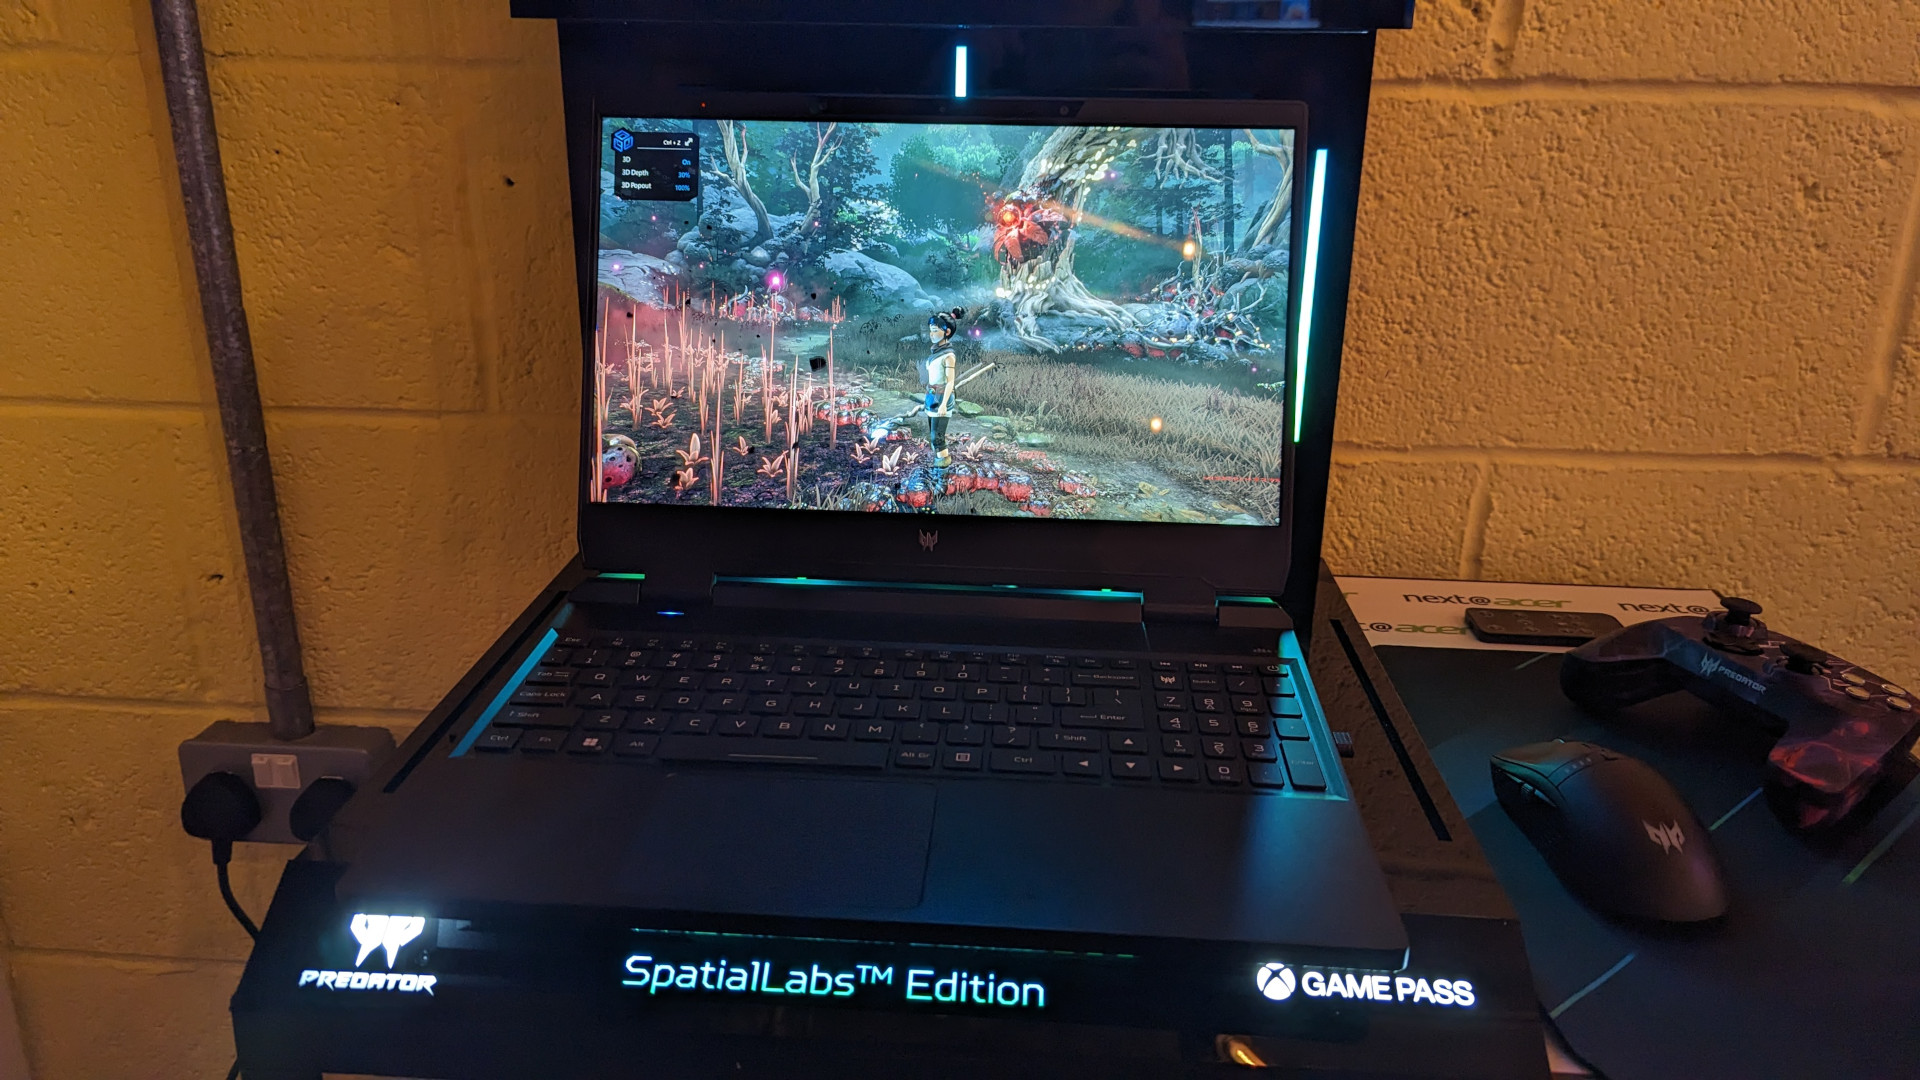 The 3D screen on this Acer Predator gaming laptop left me stunned